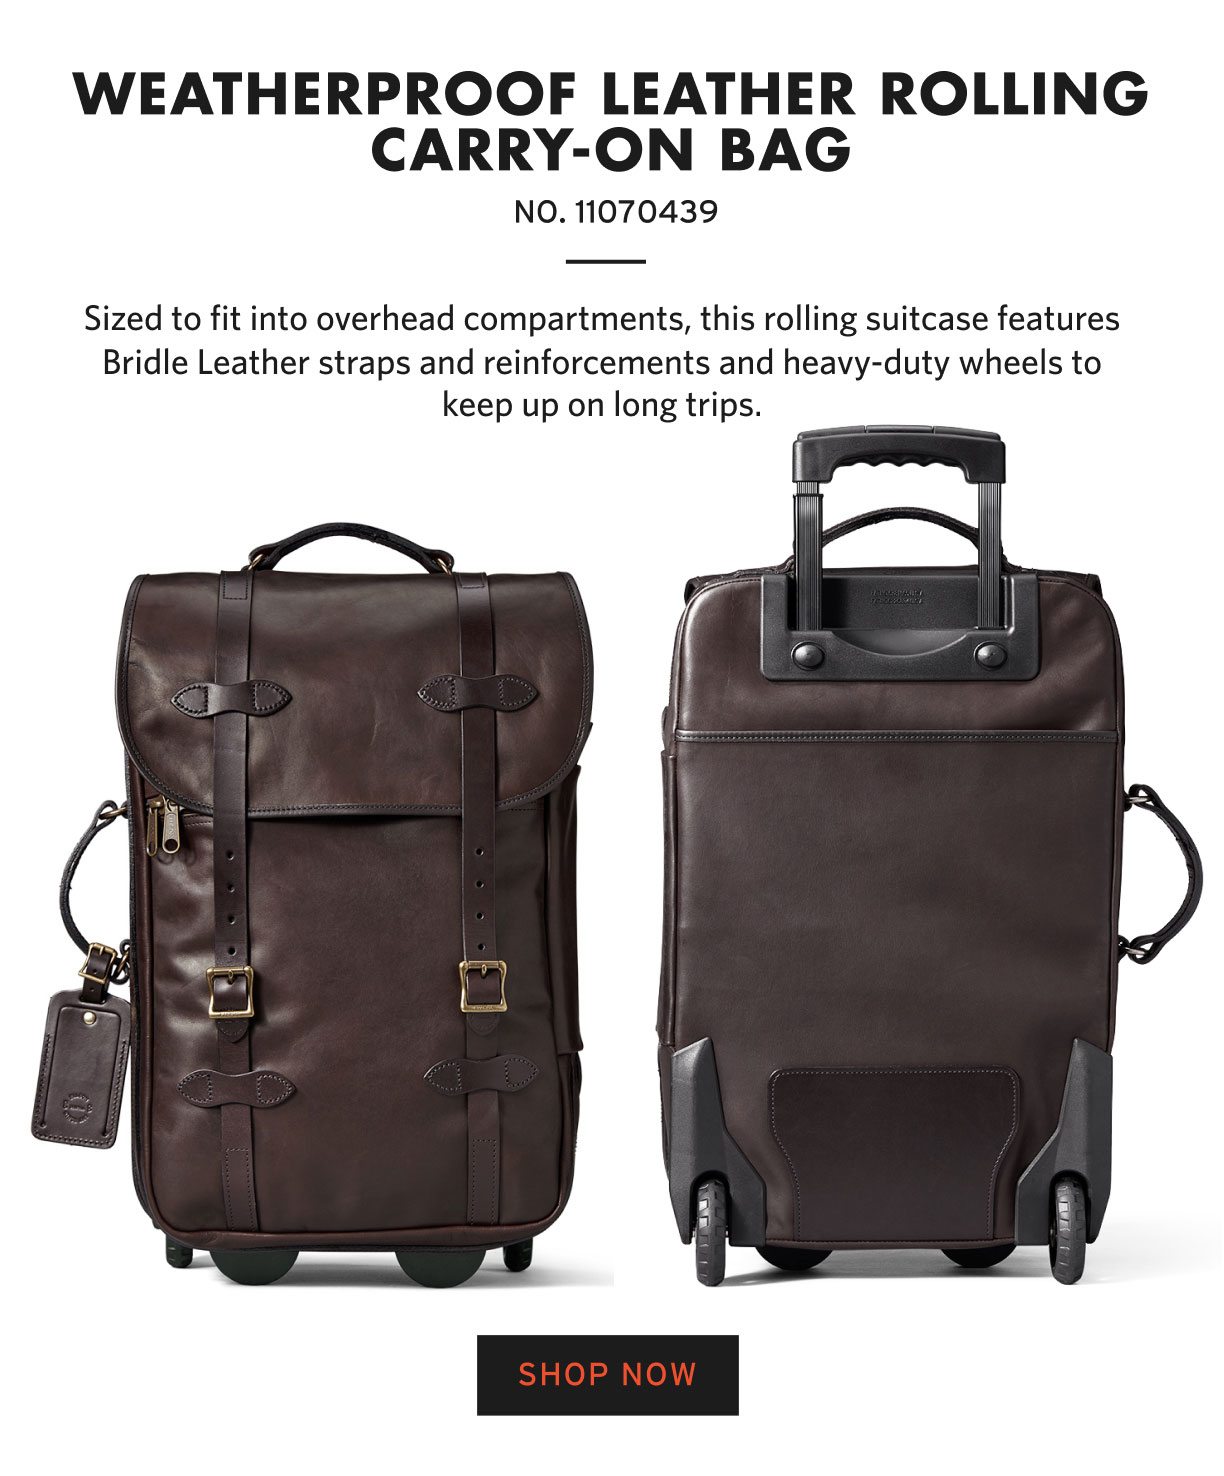 WEATHERPROOF LEATHER ROLLING CARRY-ON BAG. SHOP NOW